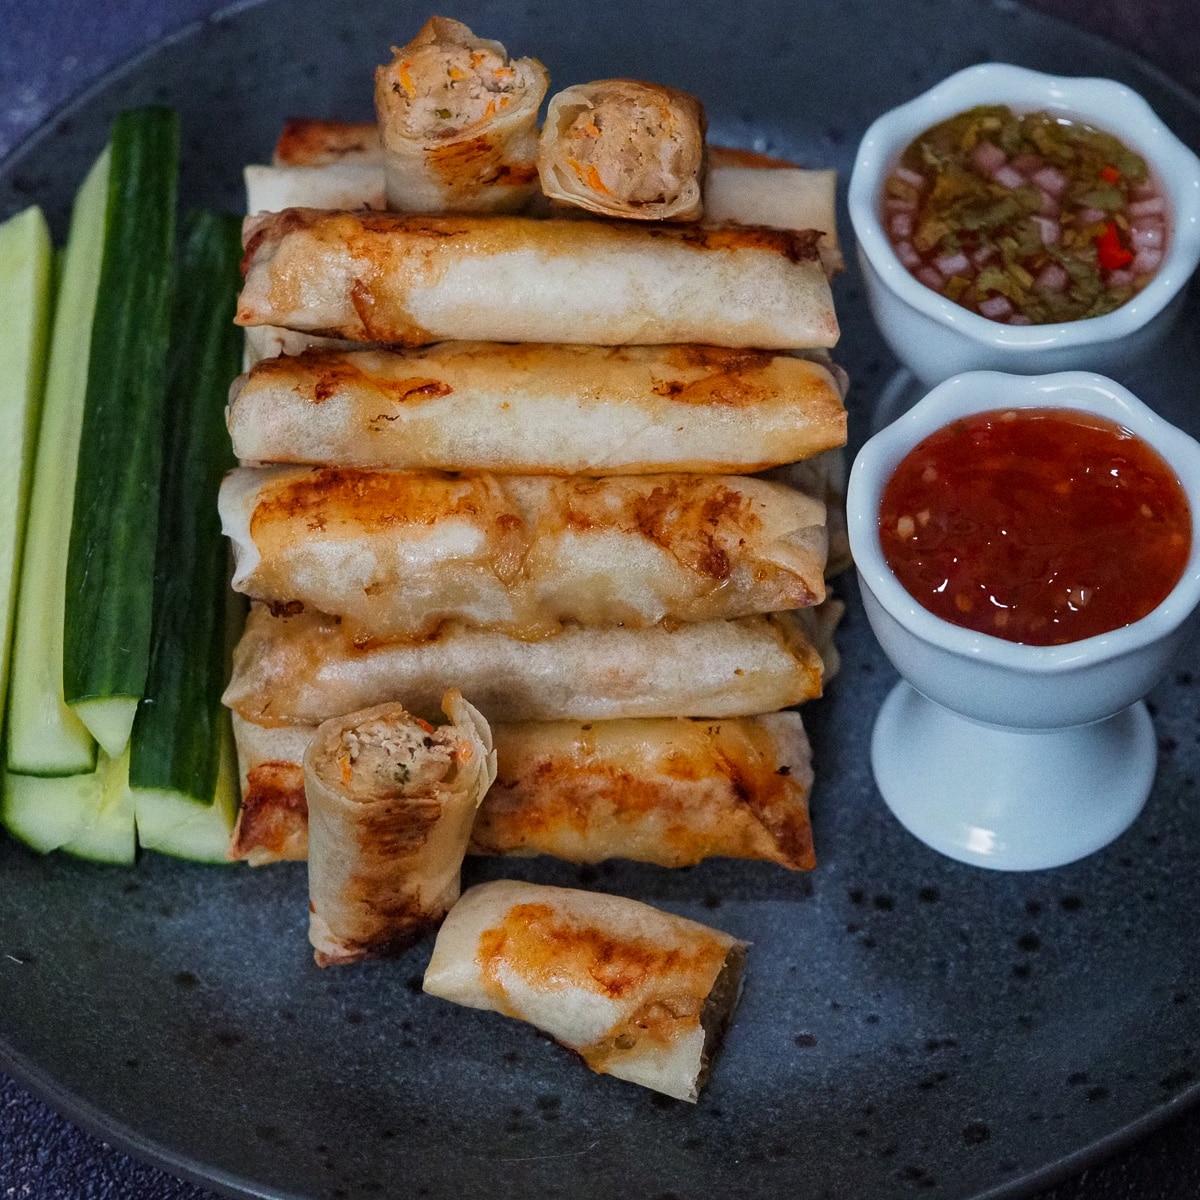 Lumpiang Shanghai With Herbs and Spices - "The Ultimate"